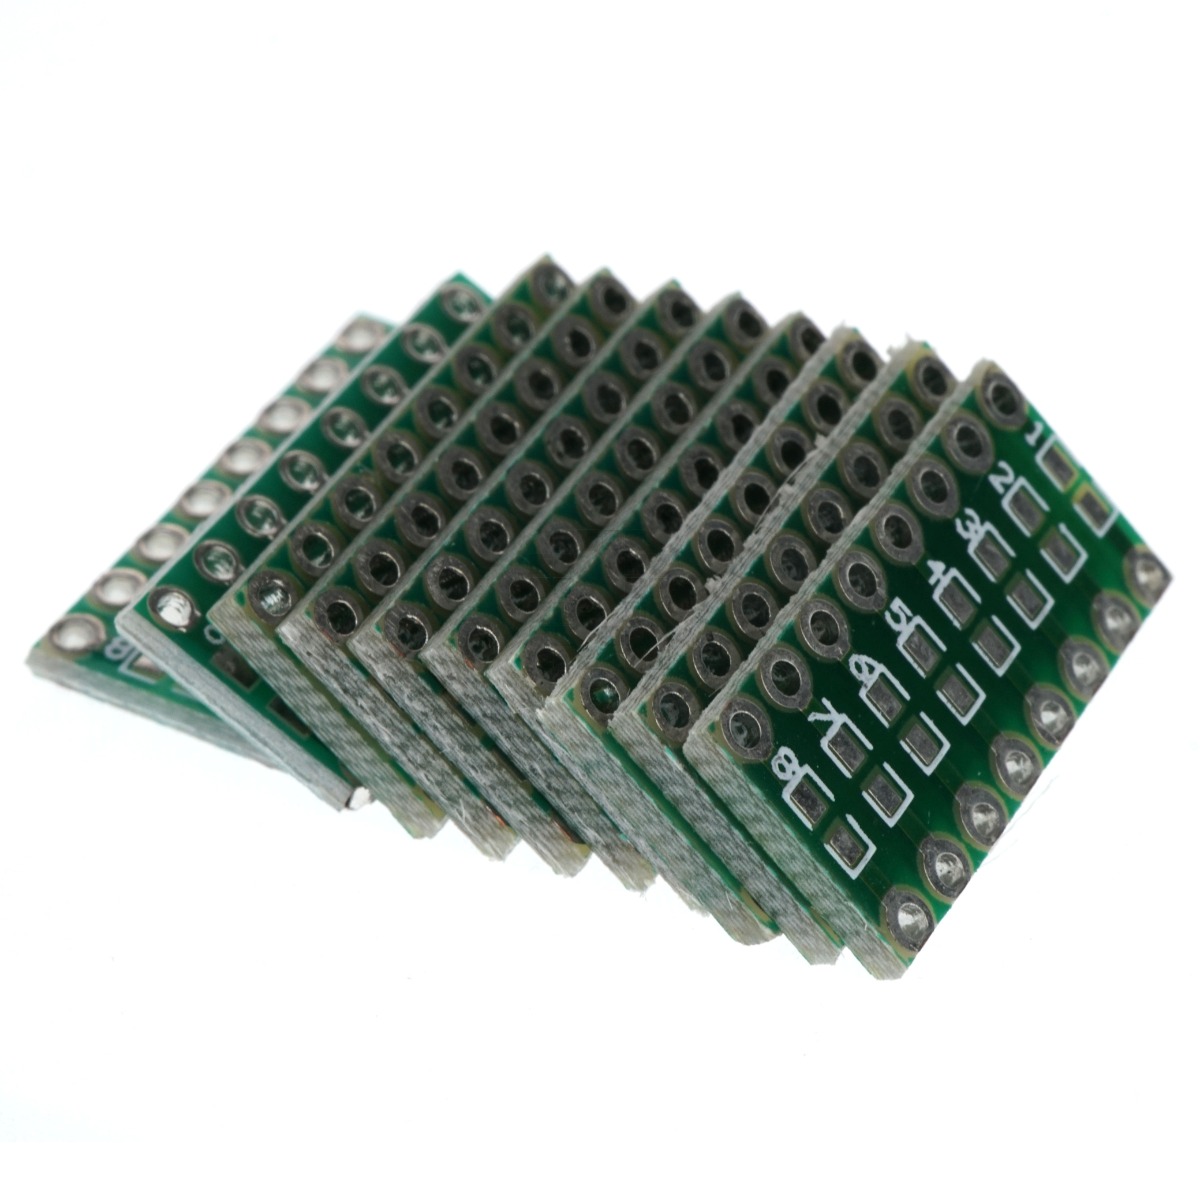 Surface Mount 0805 0603 0402 to DIP16 Adapter Circuit Board, 10 Pack